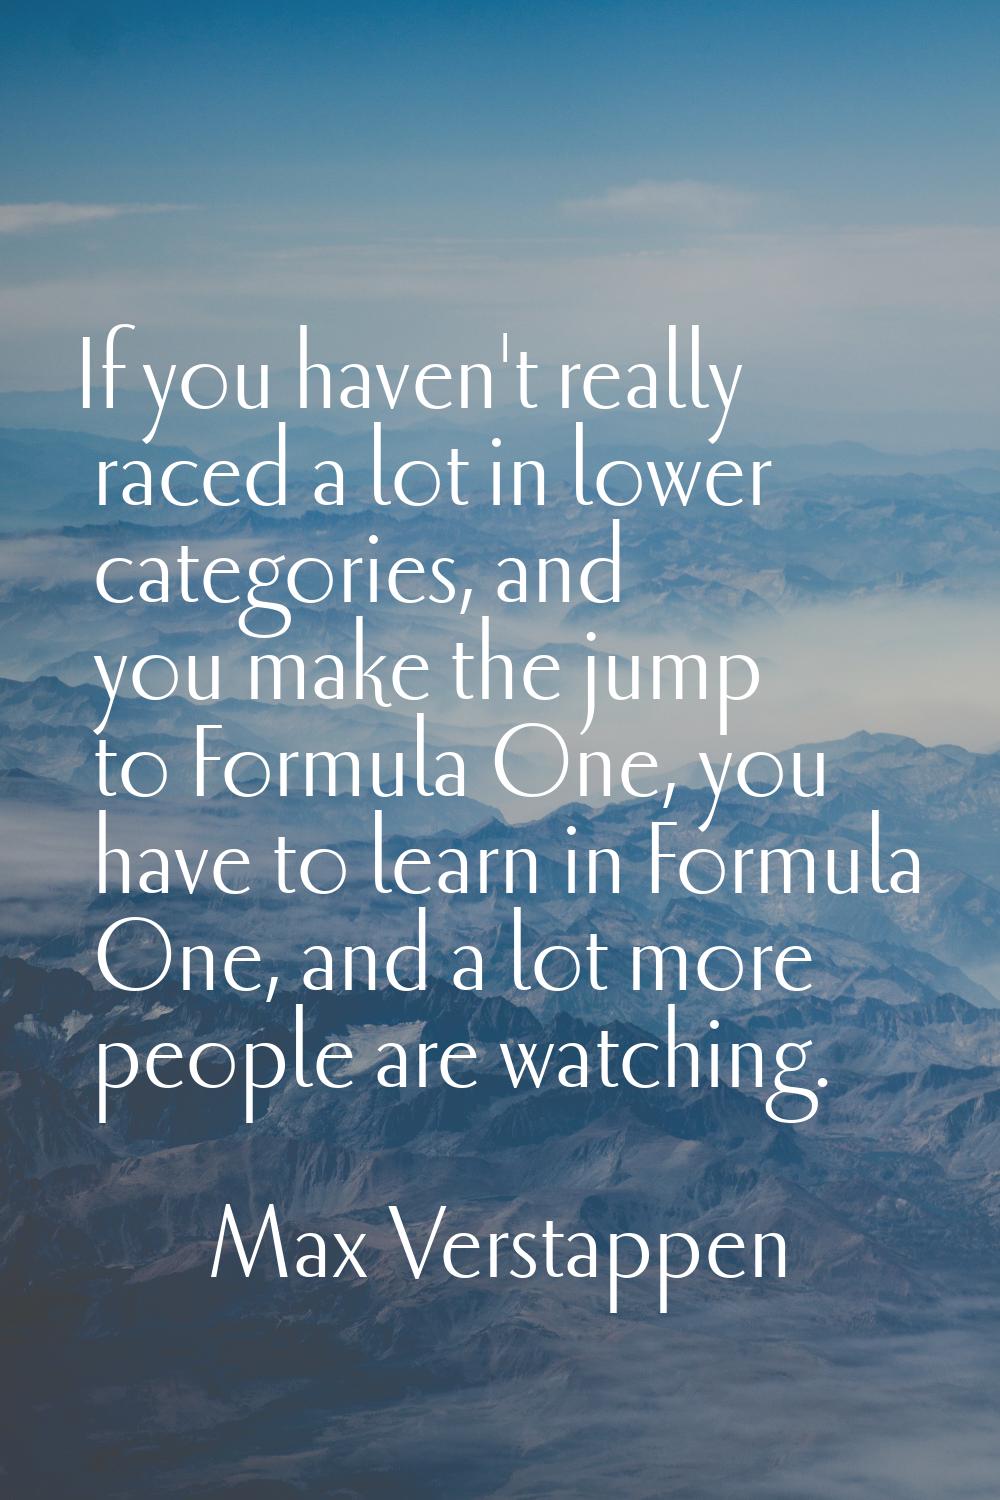 If you haven't really raced a lot in lower categories, and you make the jump to Formula One, you ha